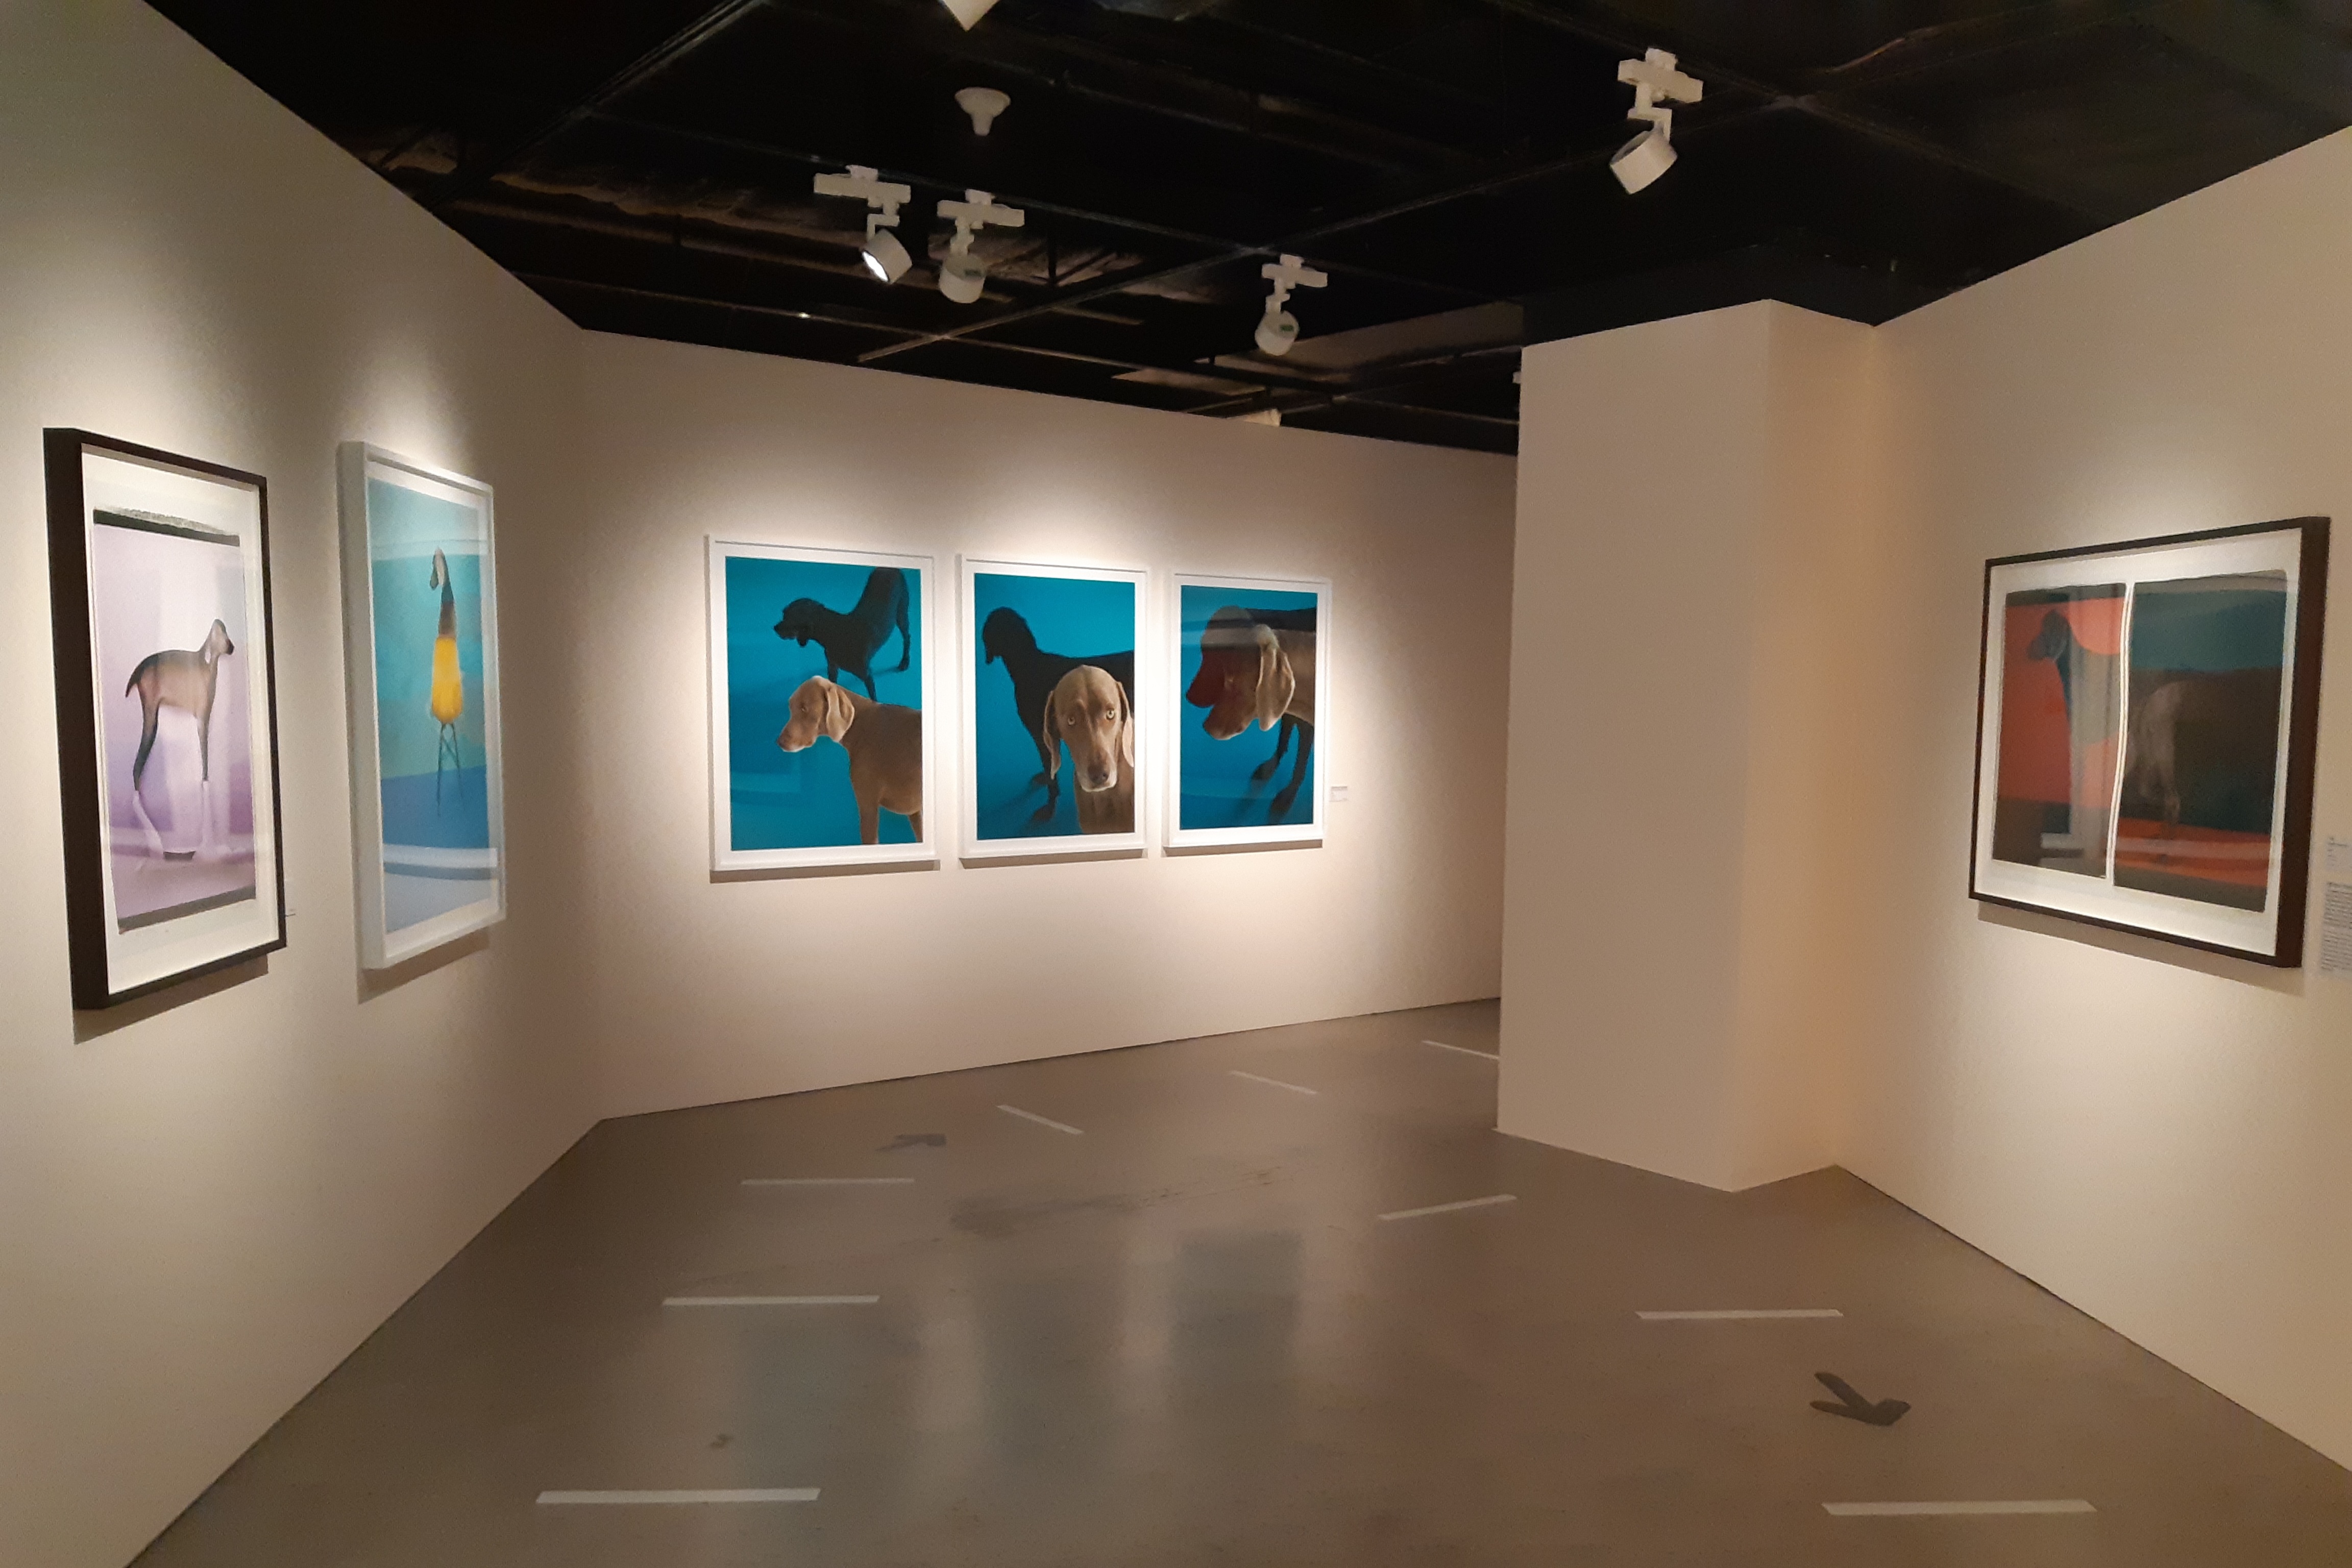 Hangaram Art Museum, Seoul Arts Center2 : Interior view of an exhibition hall displaying dog-themed paintings